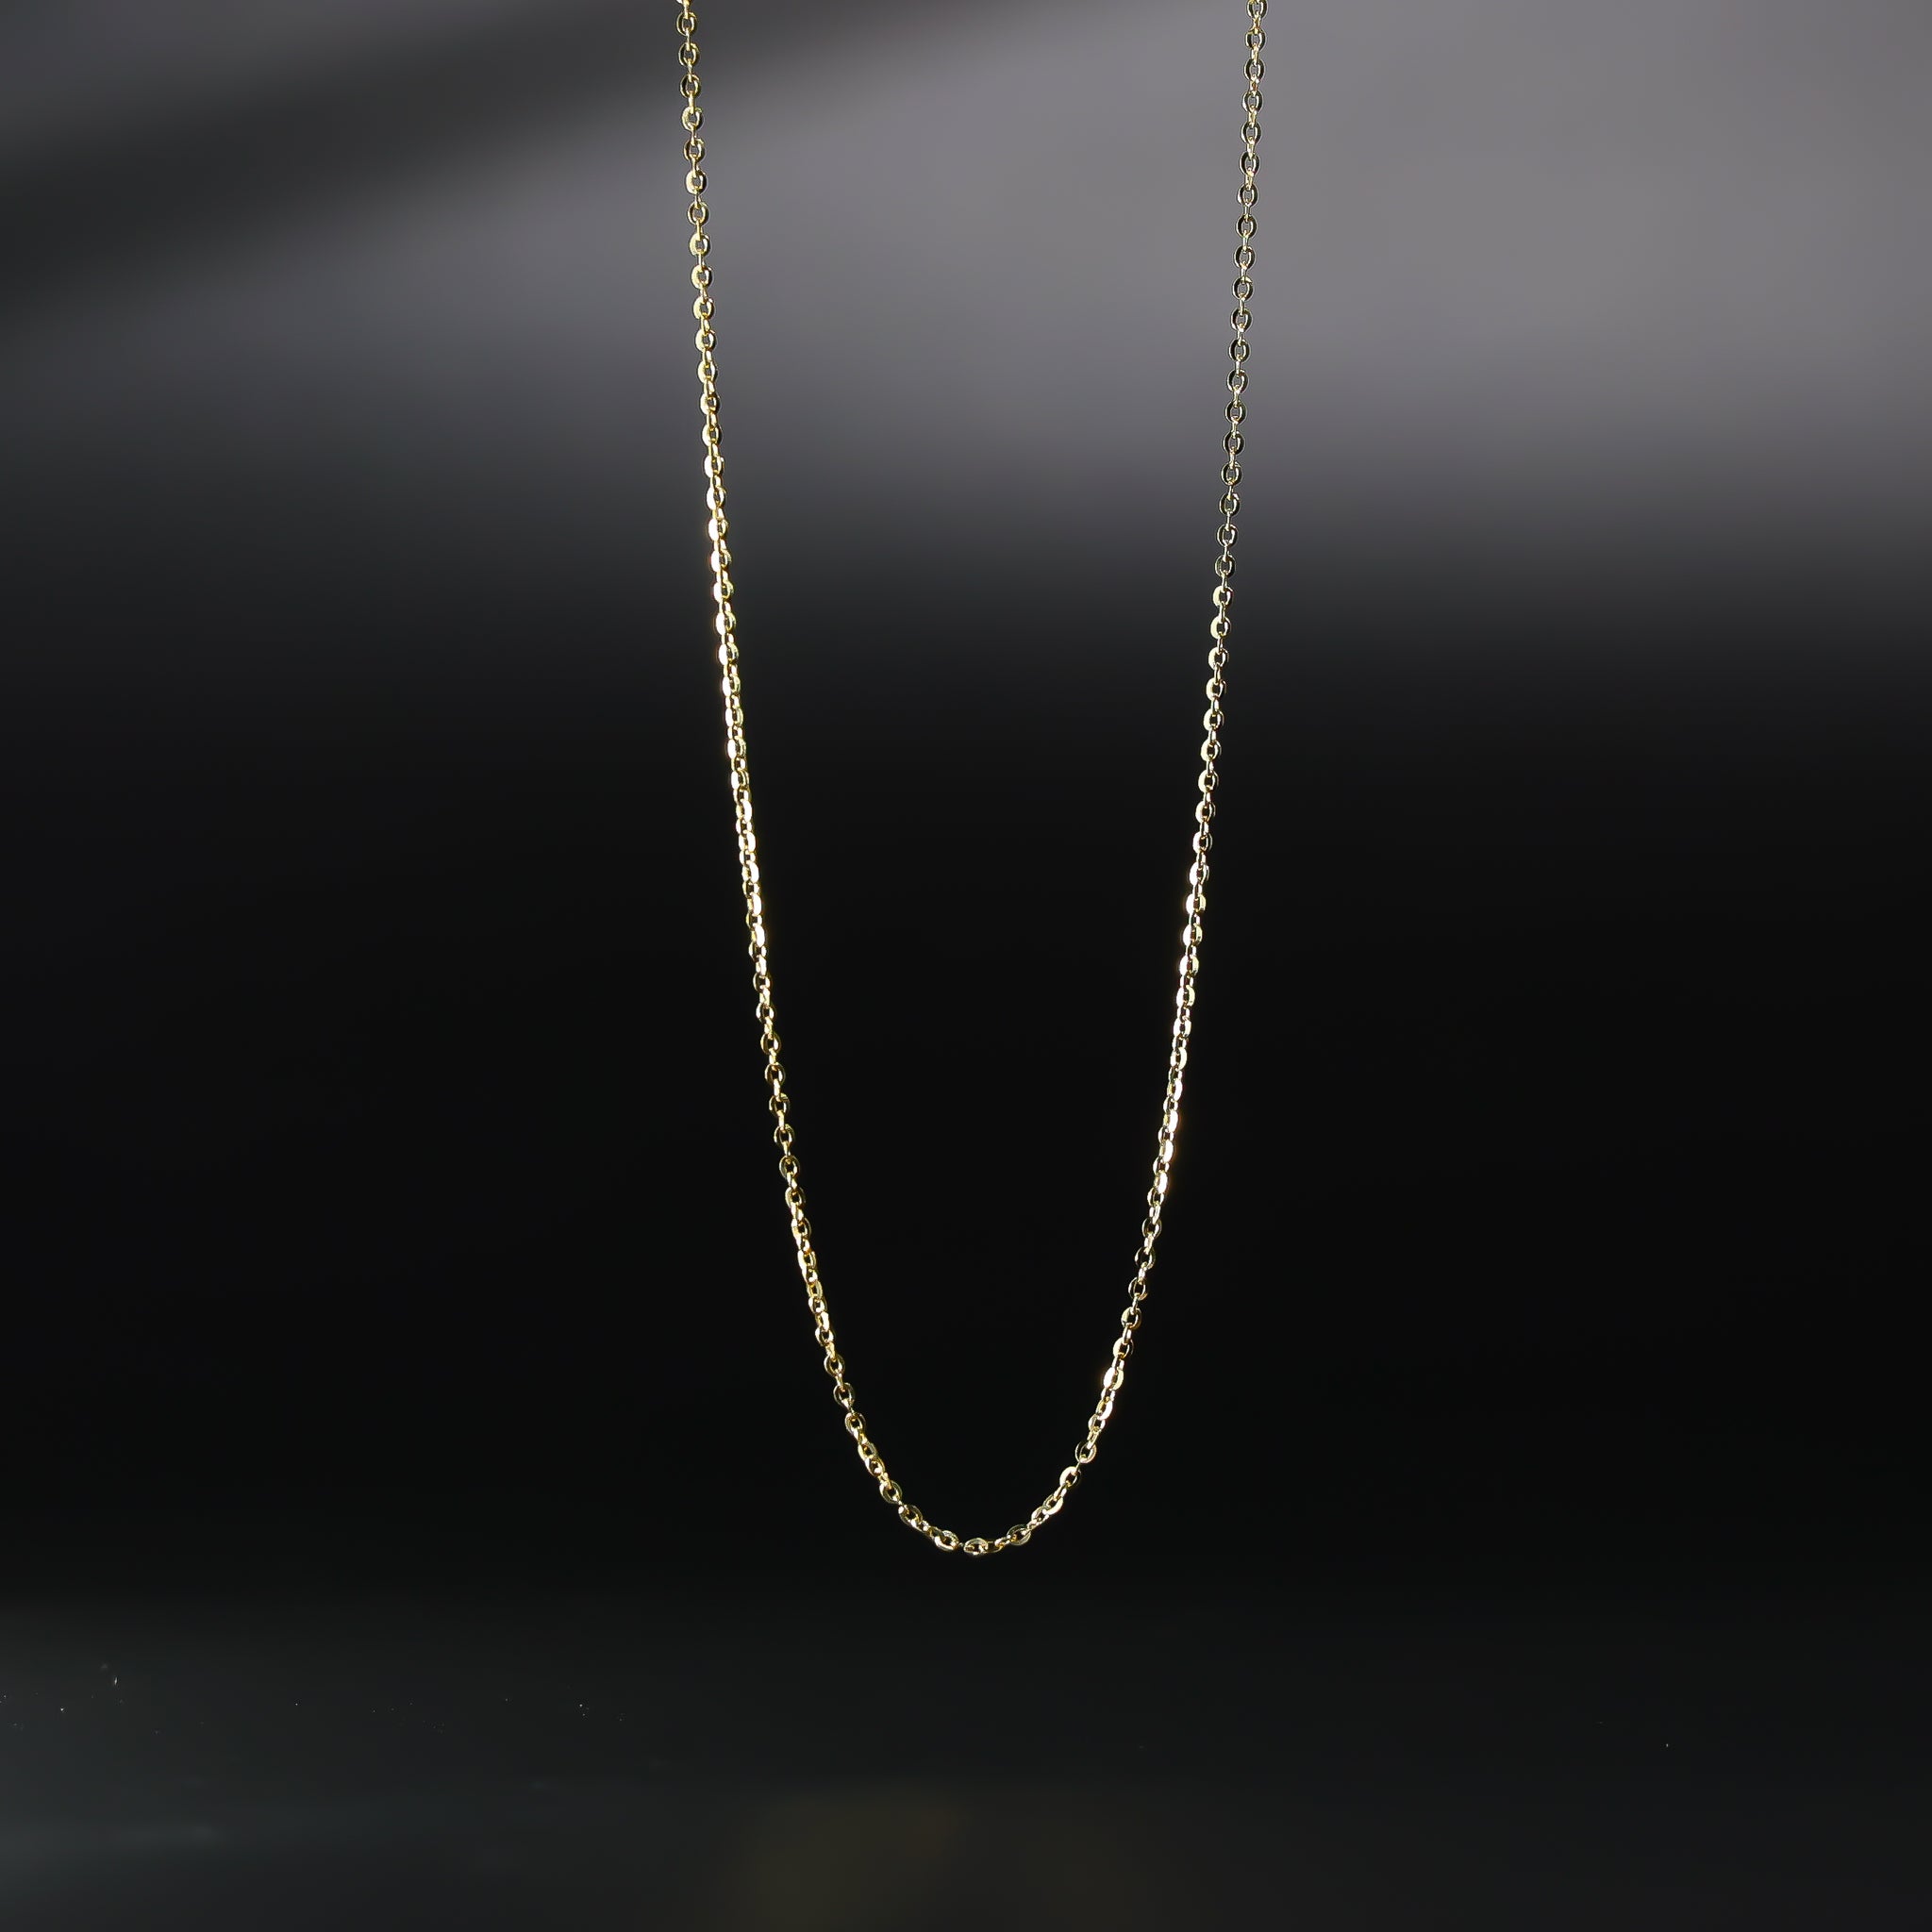 1.2mm 14k Solid Gold Cable Chain Diamond Cut Model-0232 - Charlie & Co. Jewelry